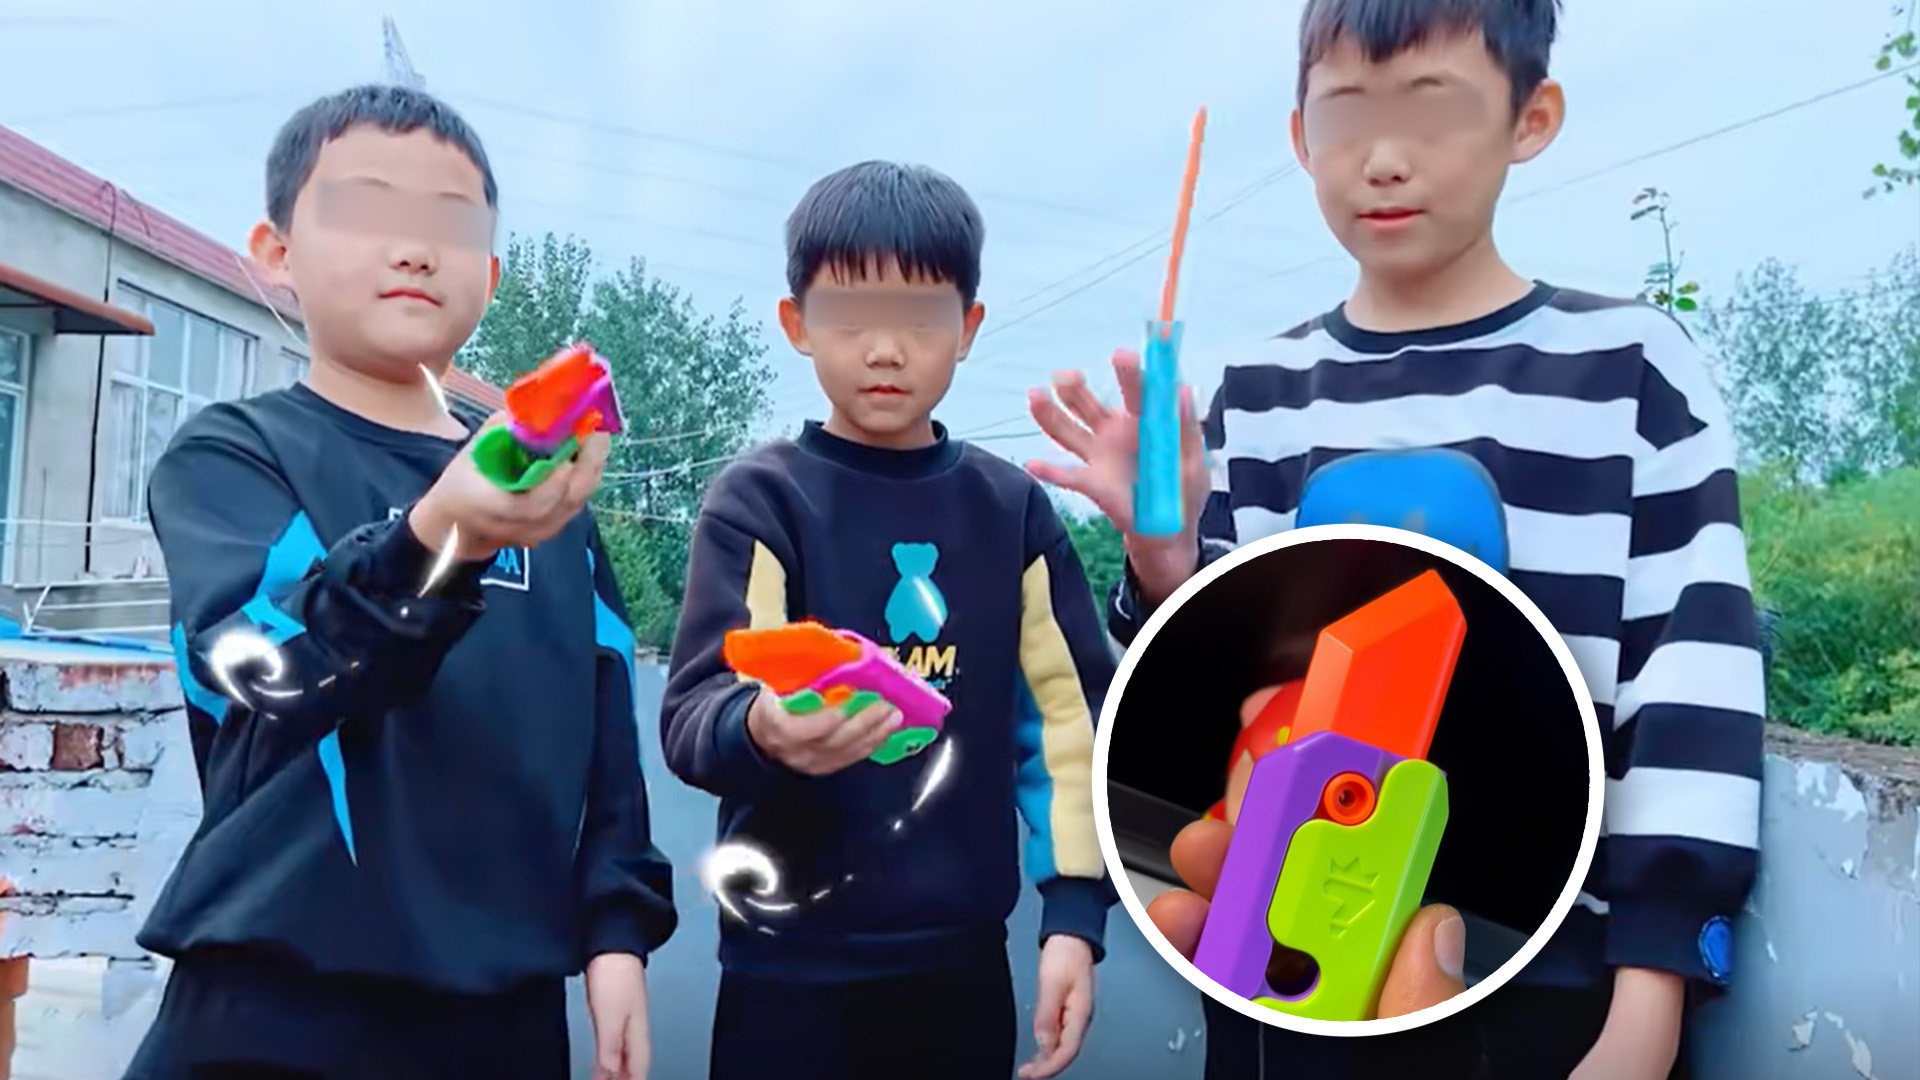 The vividly colourful plastic toy knife, nicknamed “Carrot Knife”, has been selling well online and in stores across China in recent weeks. Photo: SCMP composite/Douyin